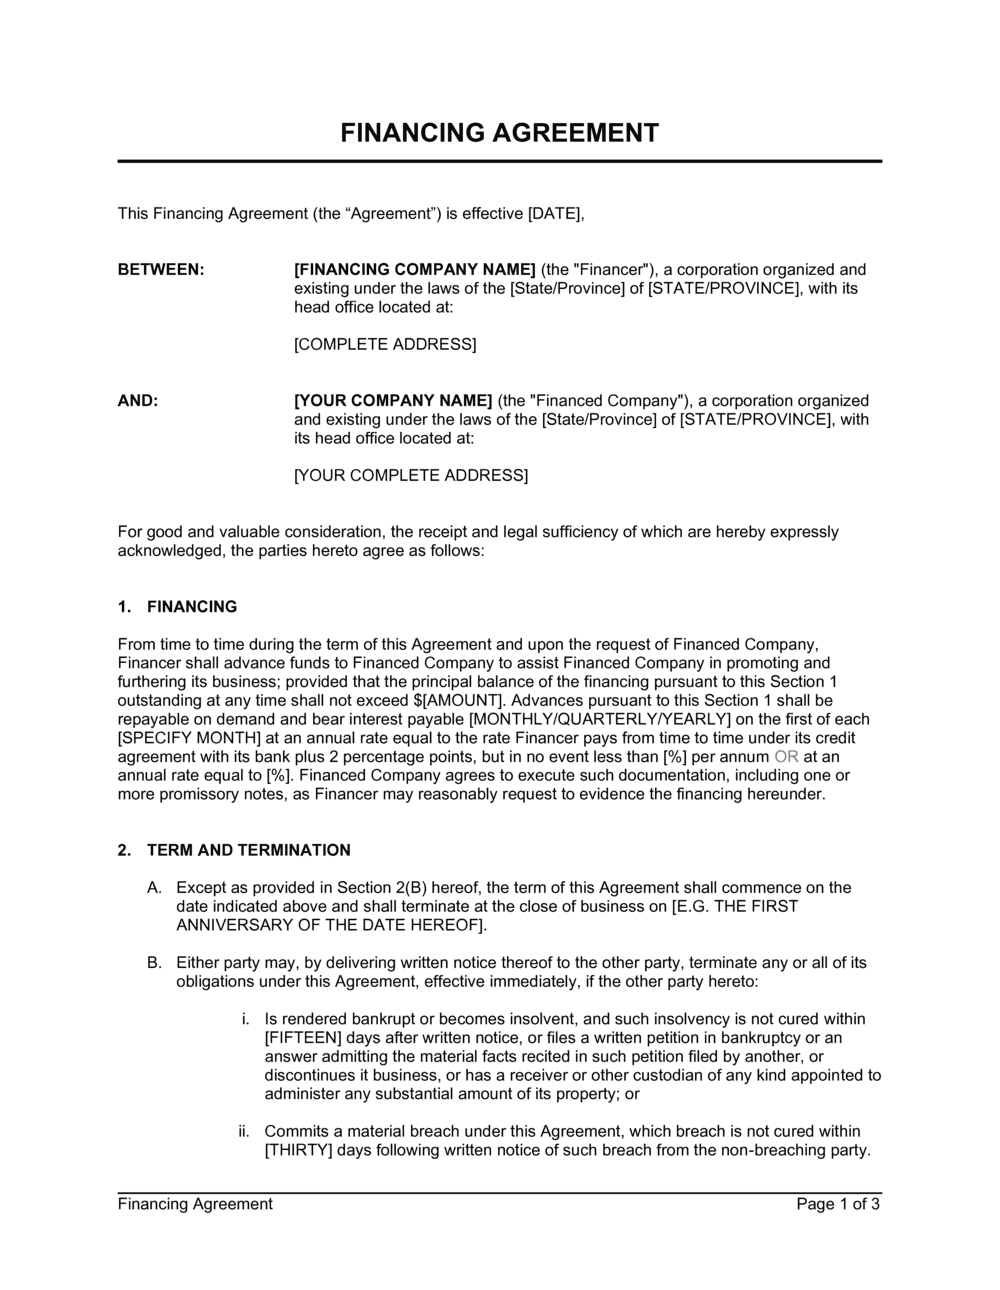 Financing Agreement Template  by Business-in-a-Box™ Inside trade finance loan agreement template